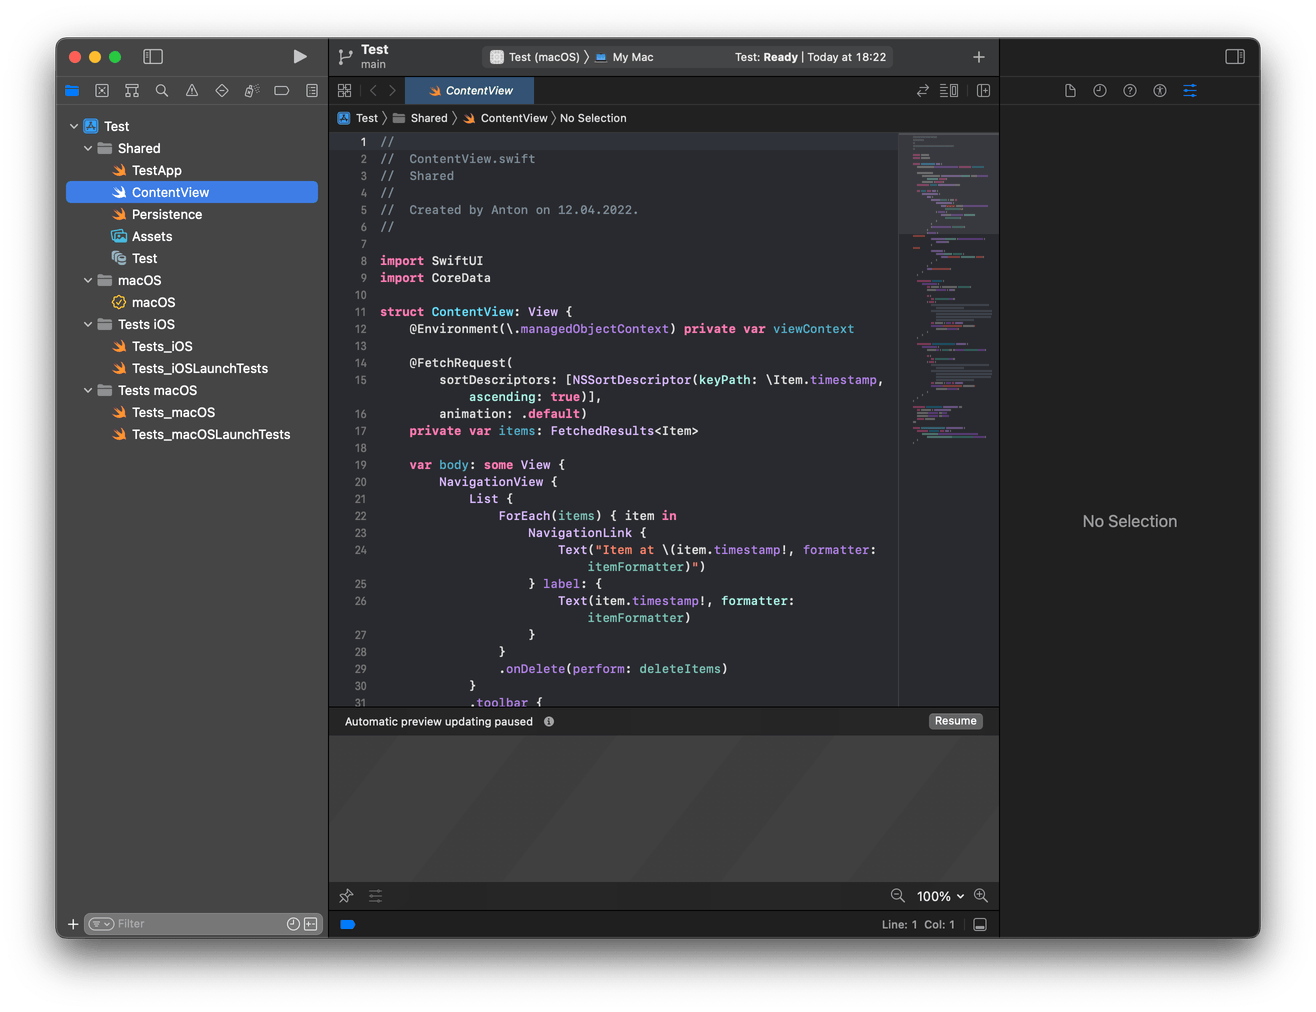 We can see that in the Xcode interface, the code editor is front and center.